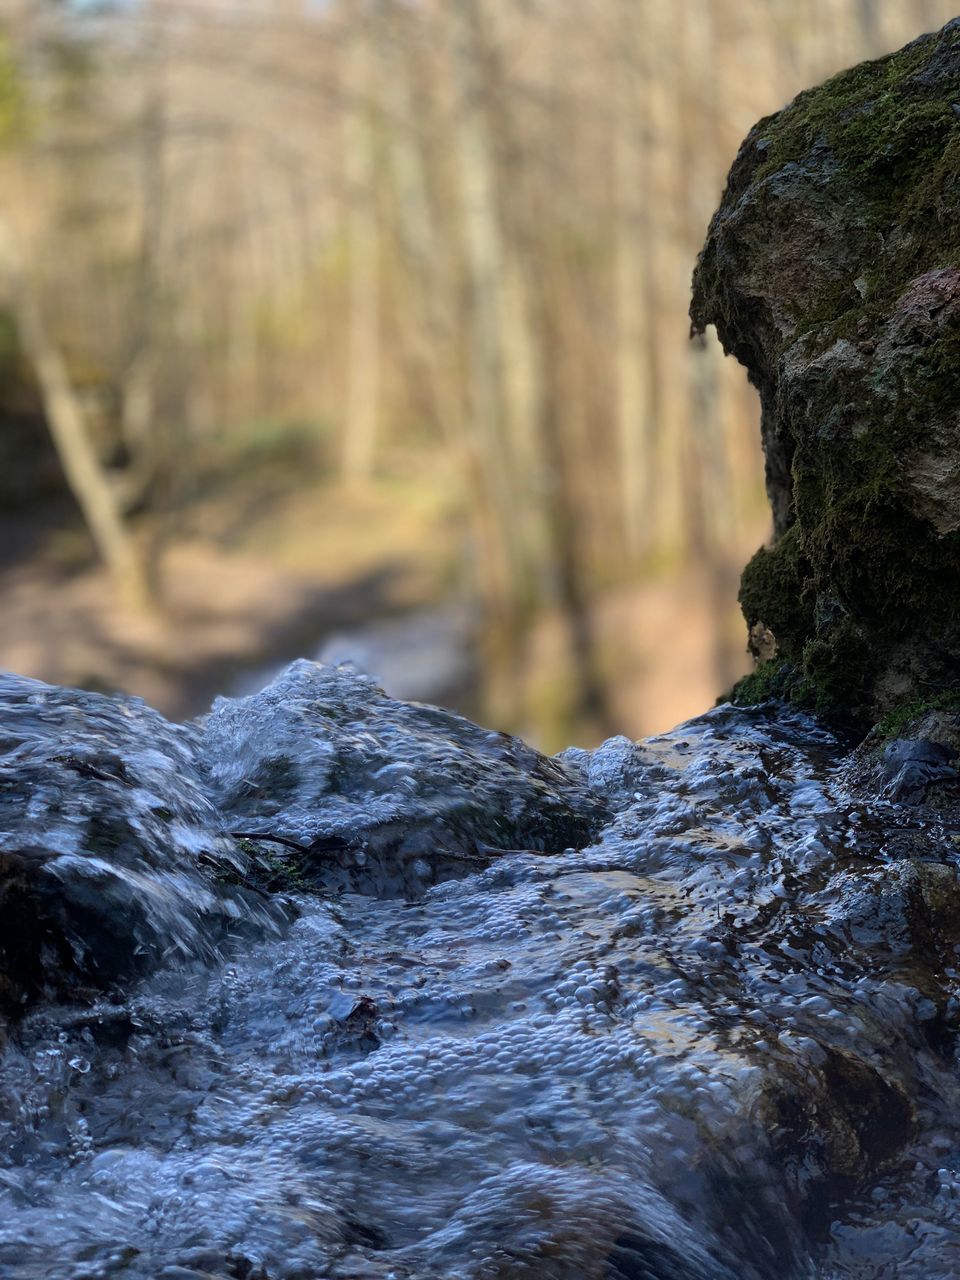 flowing water, rock, motion, rock - object, day, solid, water, nature, forest, no people, tree, river, flowing, outdoors, waterfront, focus on foreground, land, beauty in nature, close-up, stream - flowing water